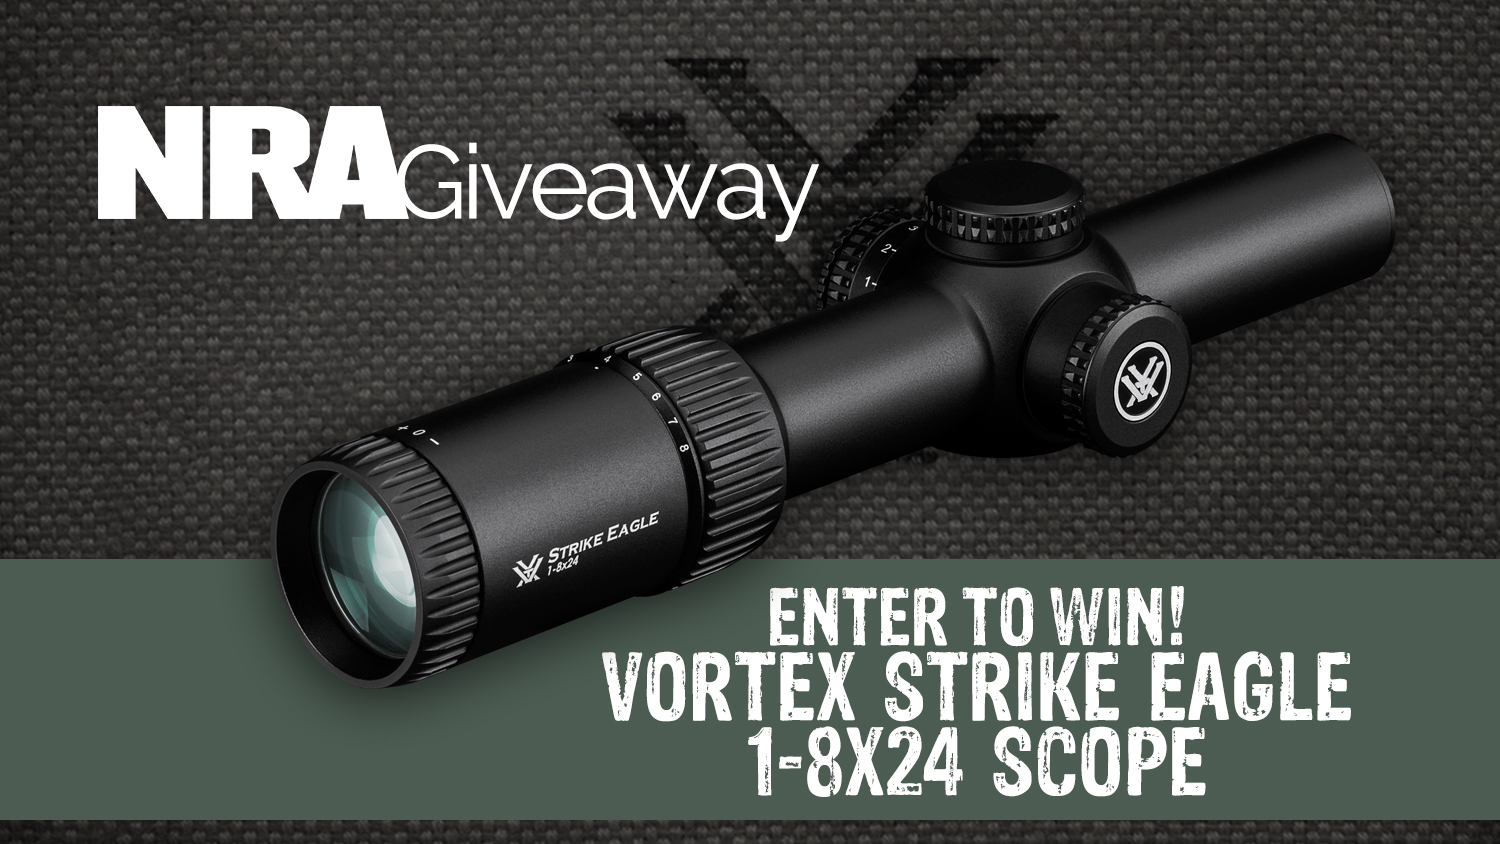 Don’t miss this opportunity to take a Vortex 1-8x24 Strike Eagle scope home!